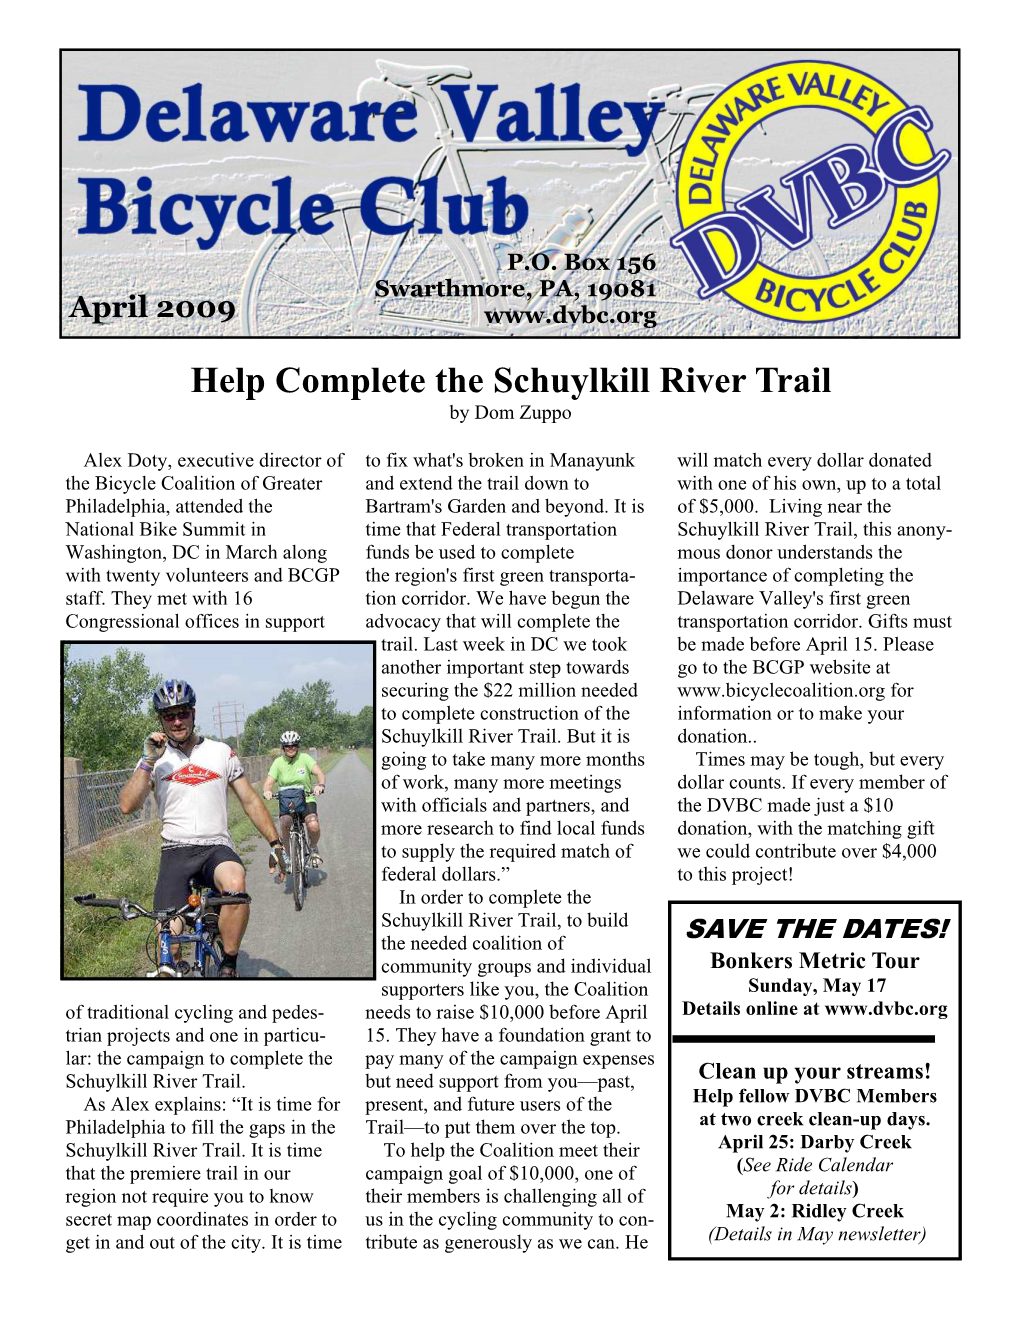 Help Complete the Schuylkill River Trail by Dom Zuppo